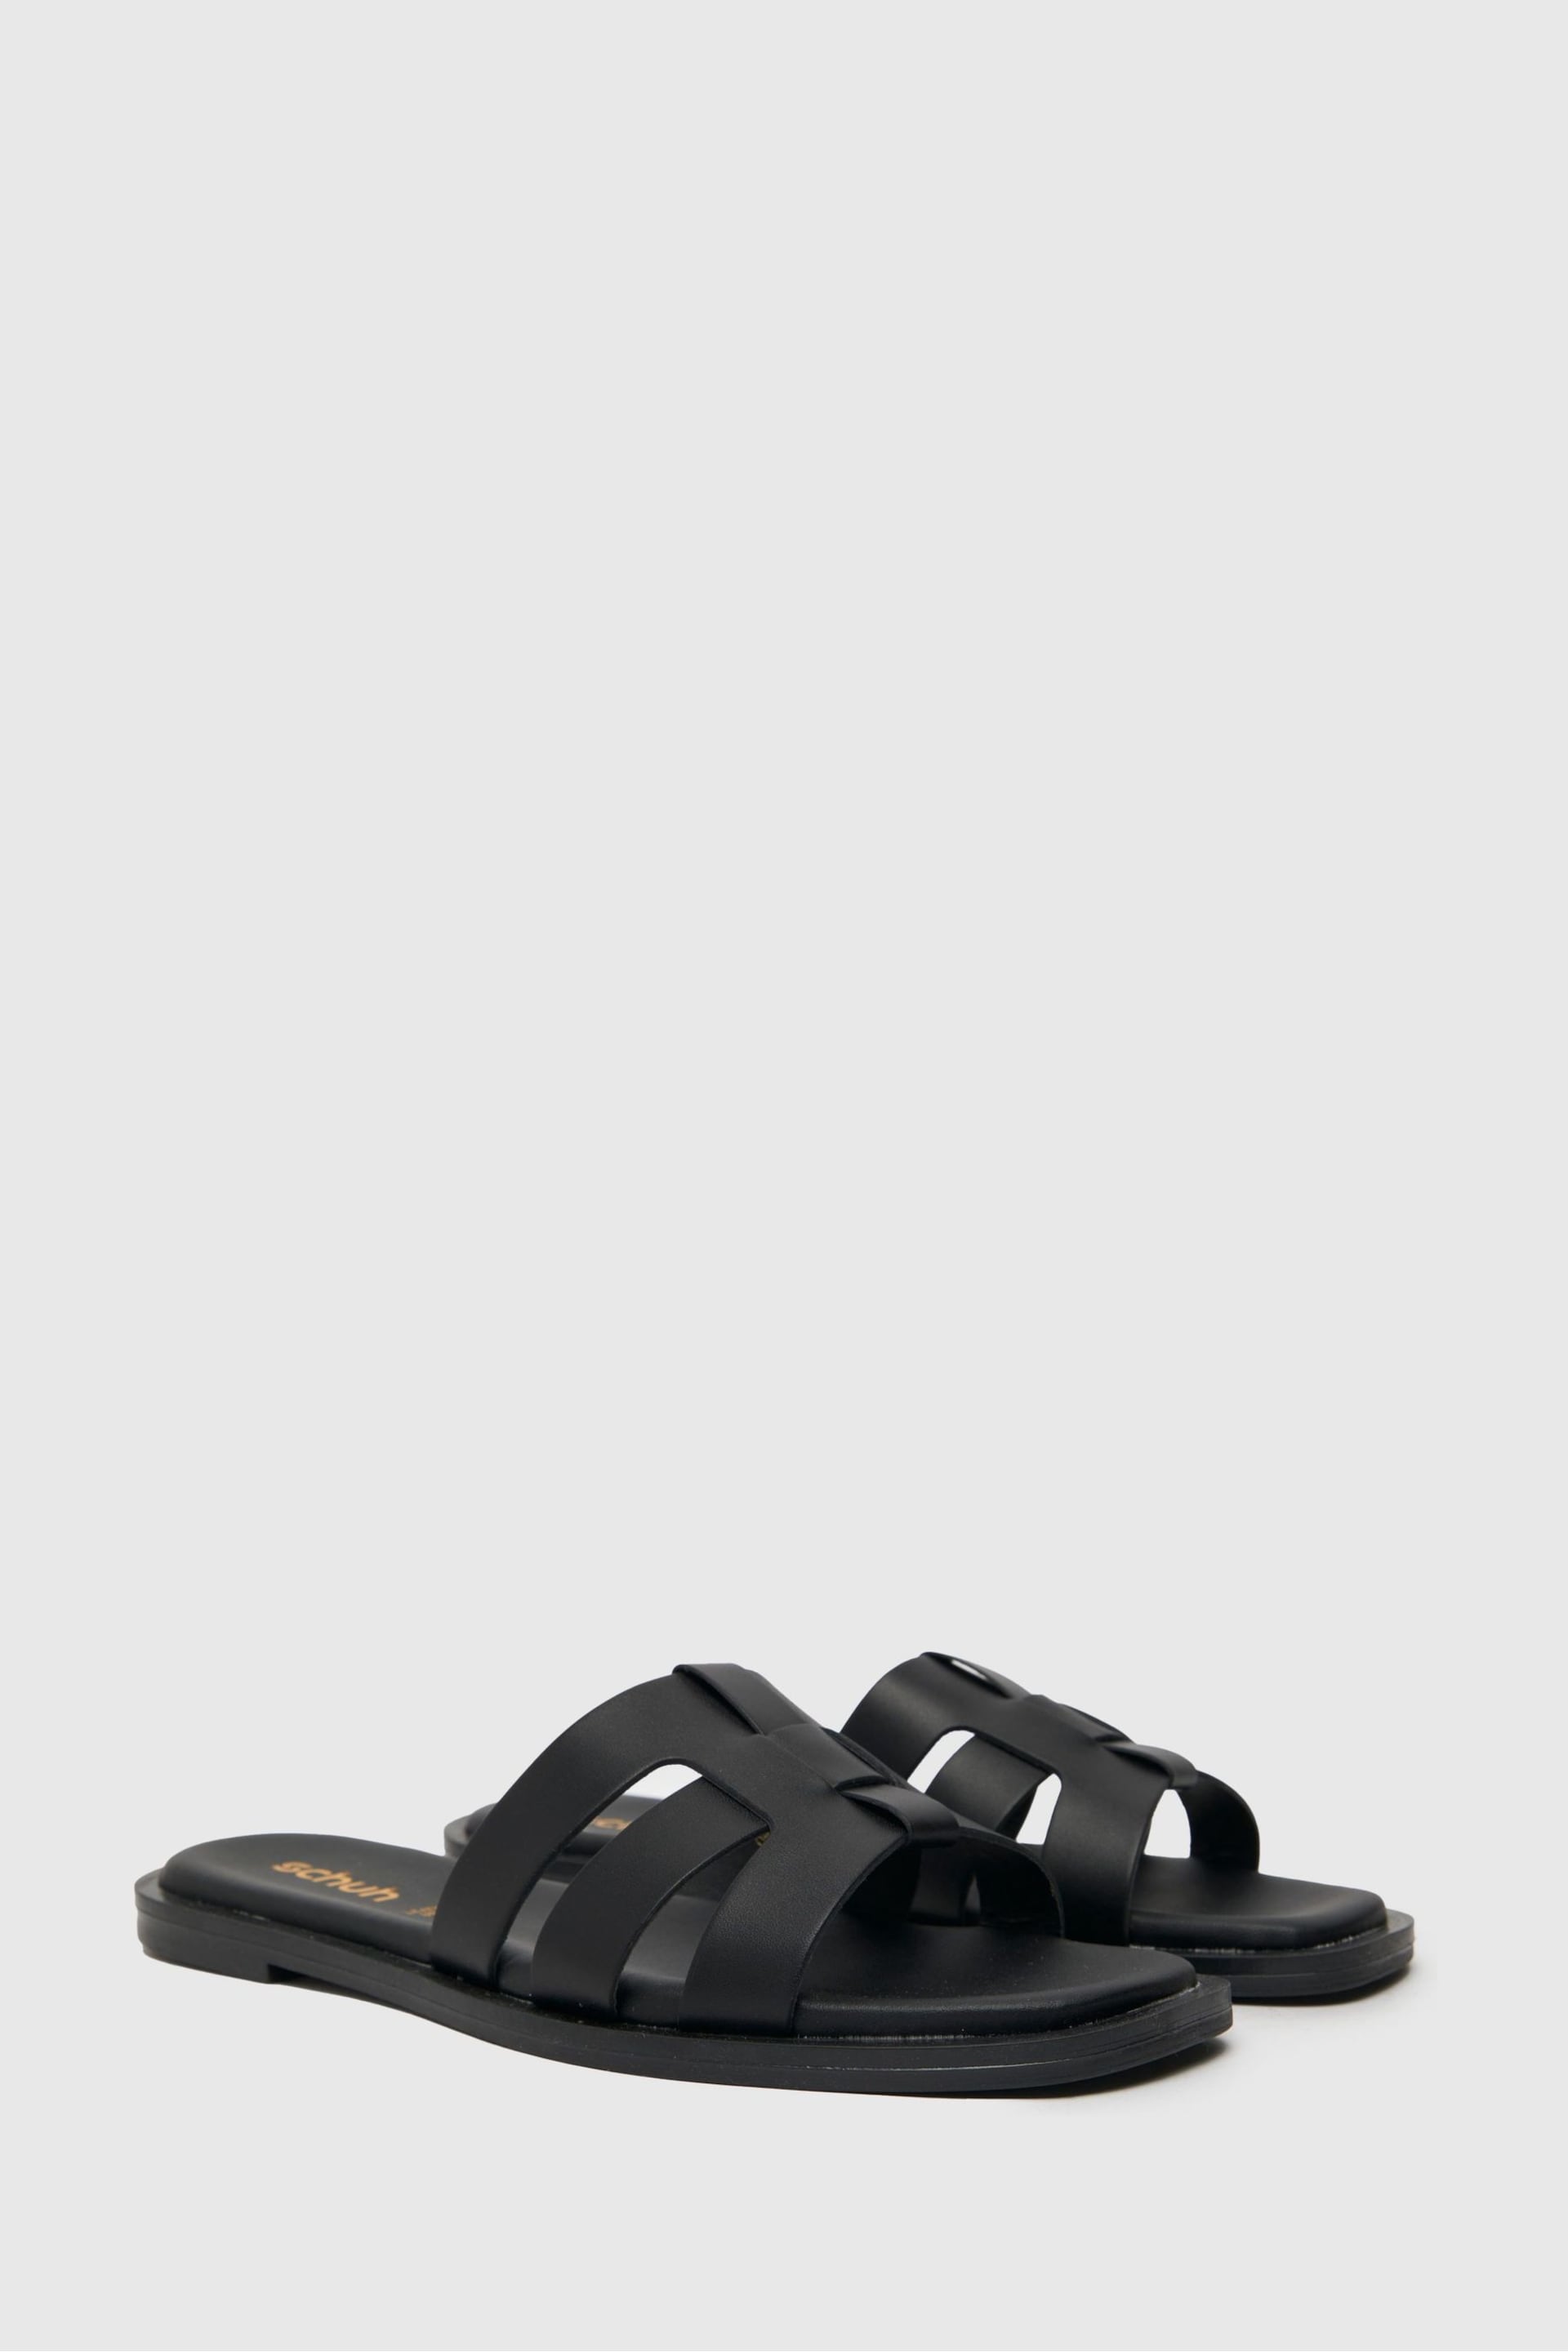 Schuh Tierney Leather Sliders - Image 2 of 4